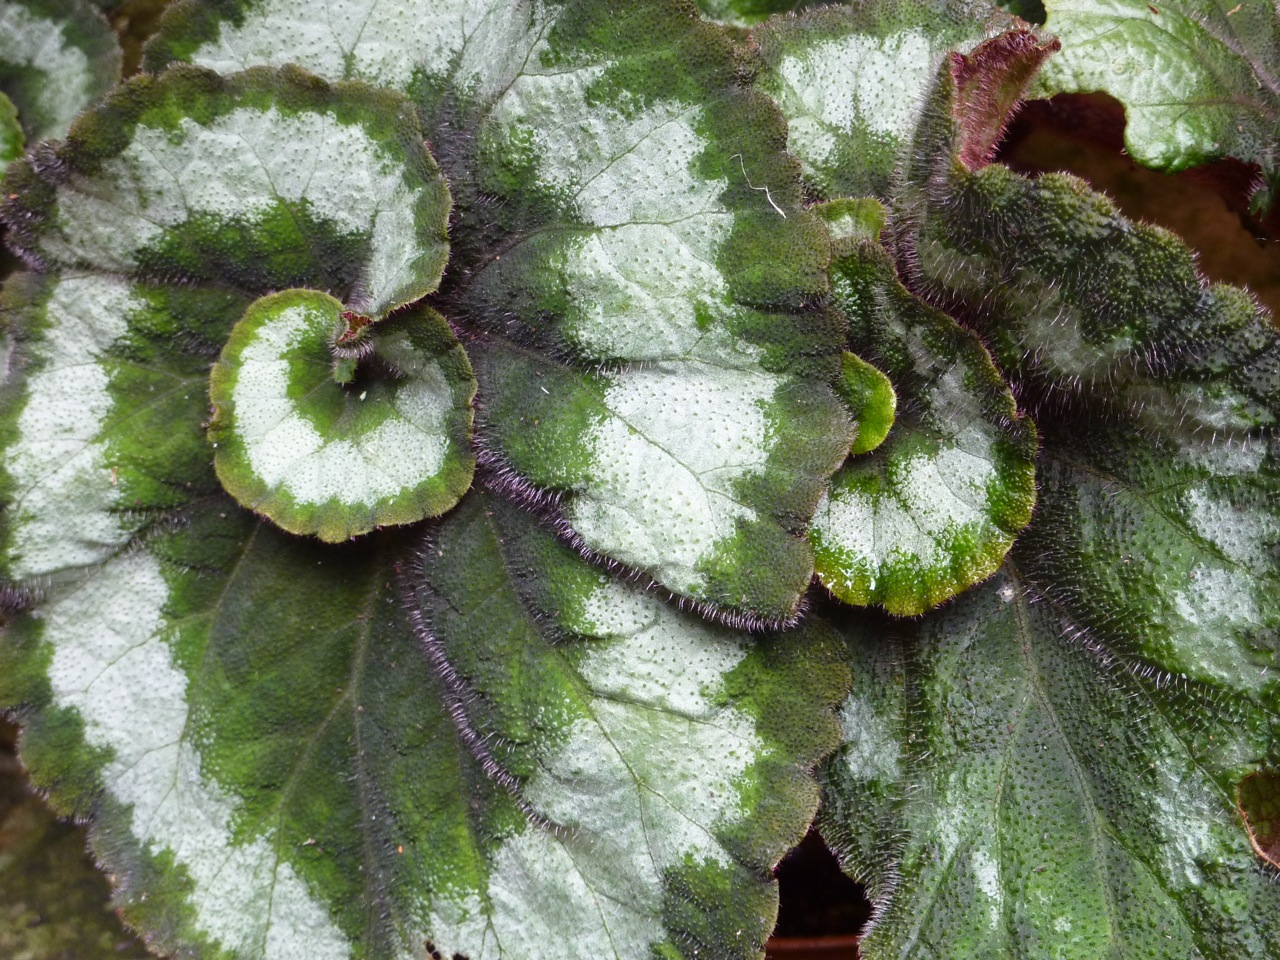 Begonia 'Escargot' has magnificently marked whorled leaves and rusty red flocked stems (available here: http://forum.theenduringgardener.com/294-begonia-escargot)